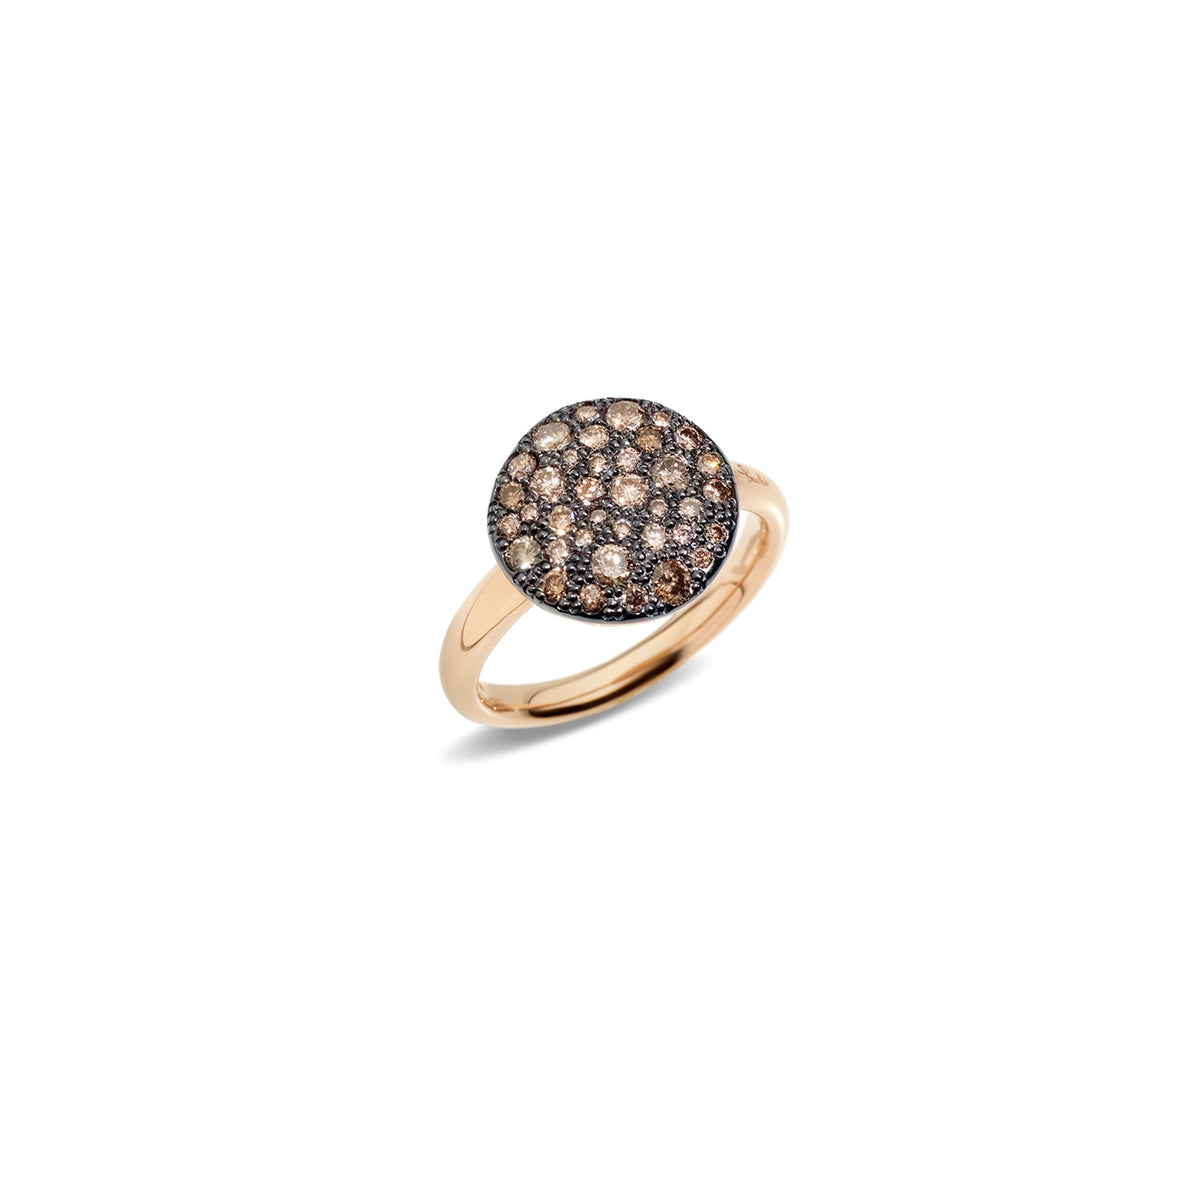 Sabbia Ring in 18k Rose Gold with Brown Diamonds large - Orsini Jewellers NZ